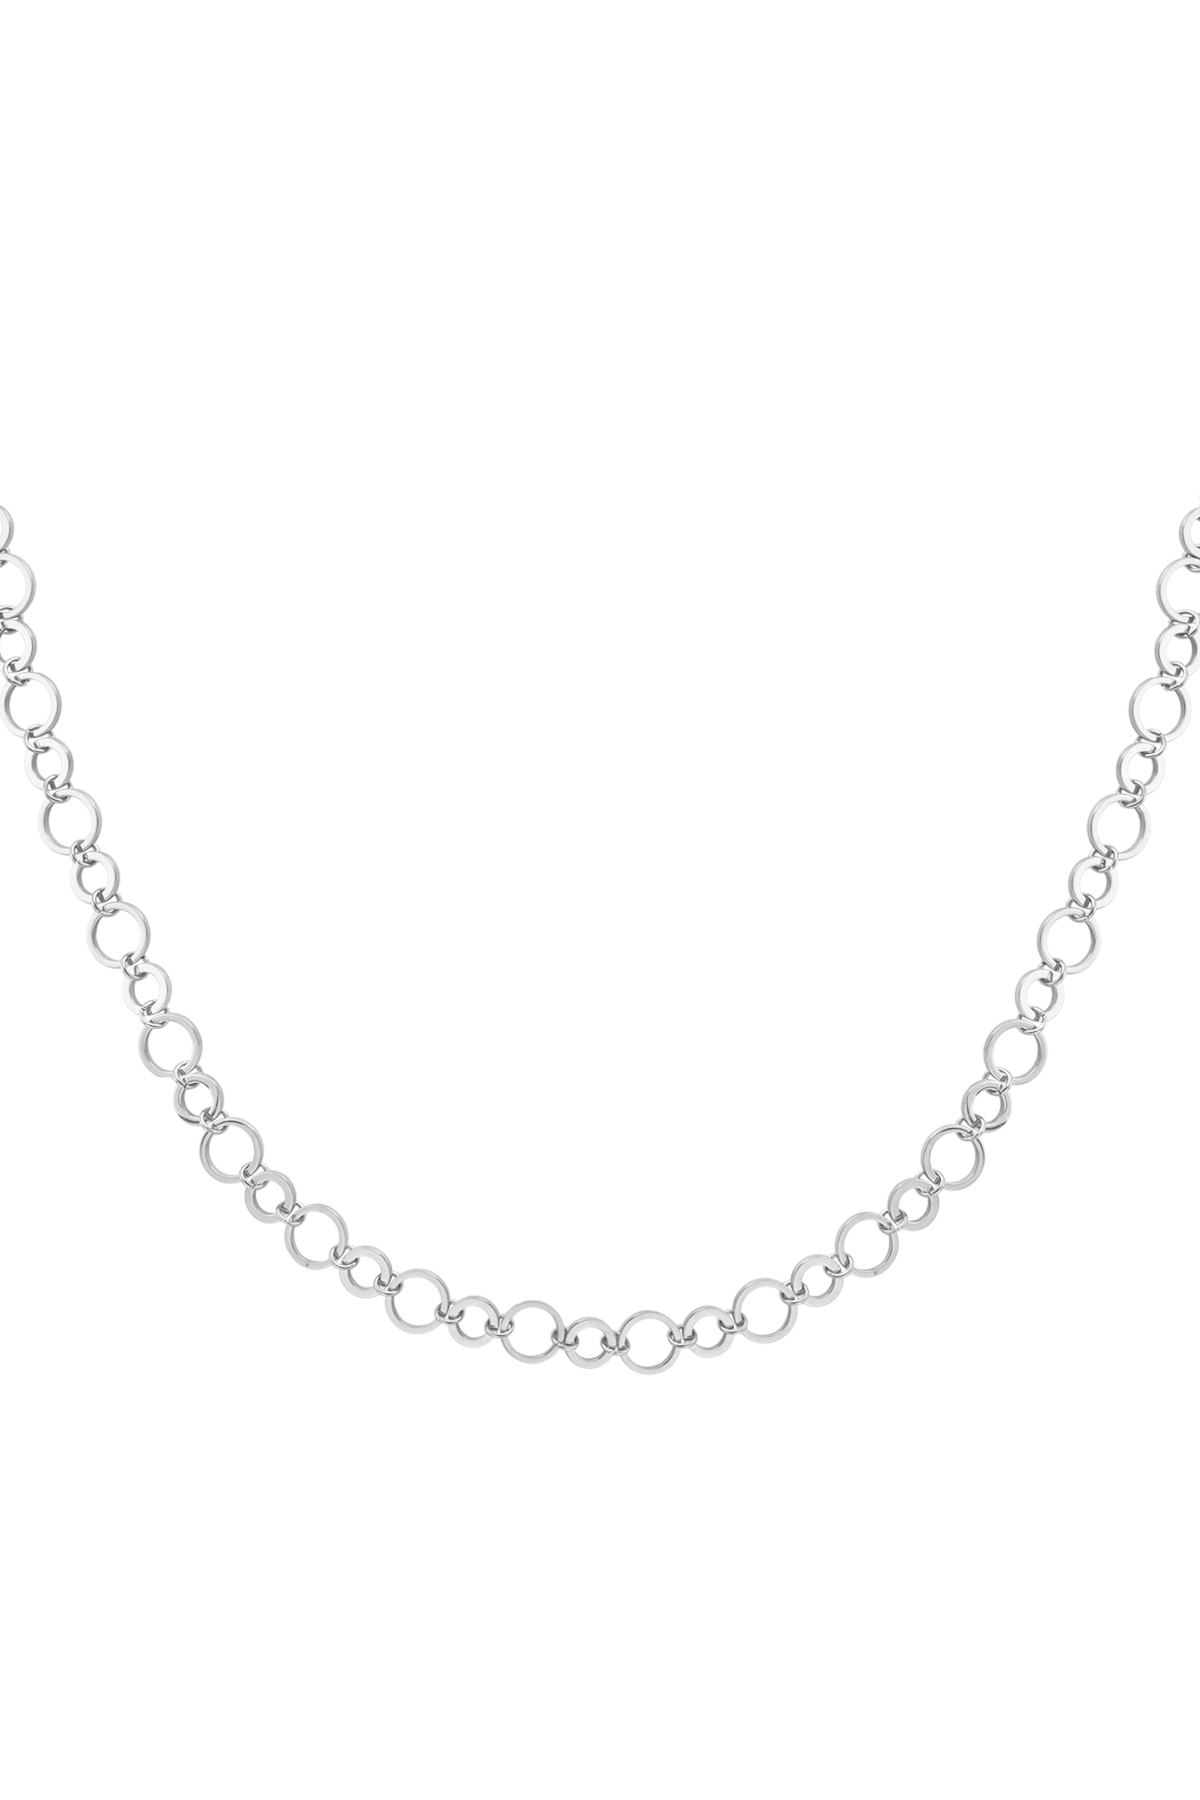 Necklace small and large round links - silver h5 